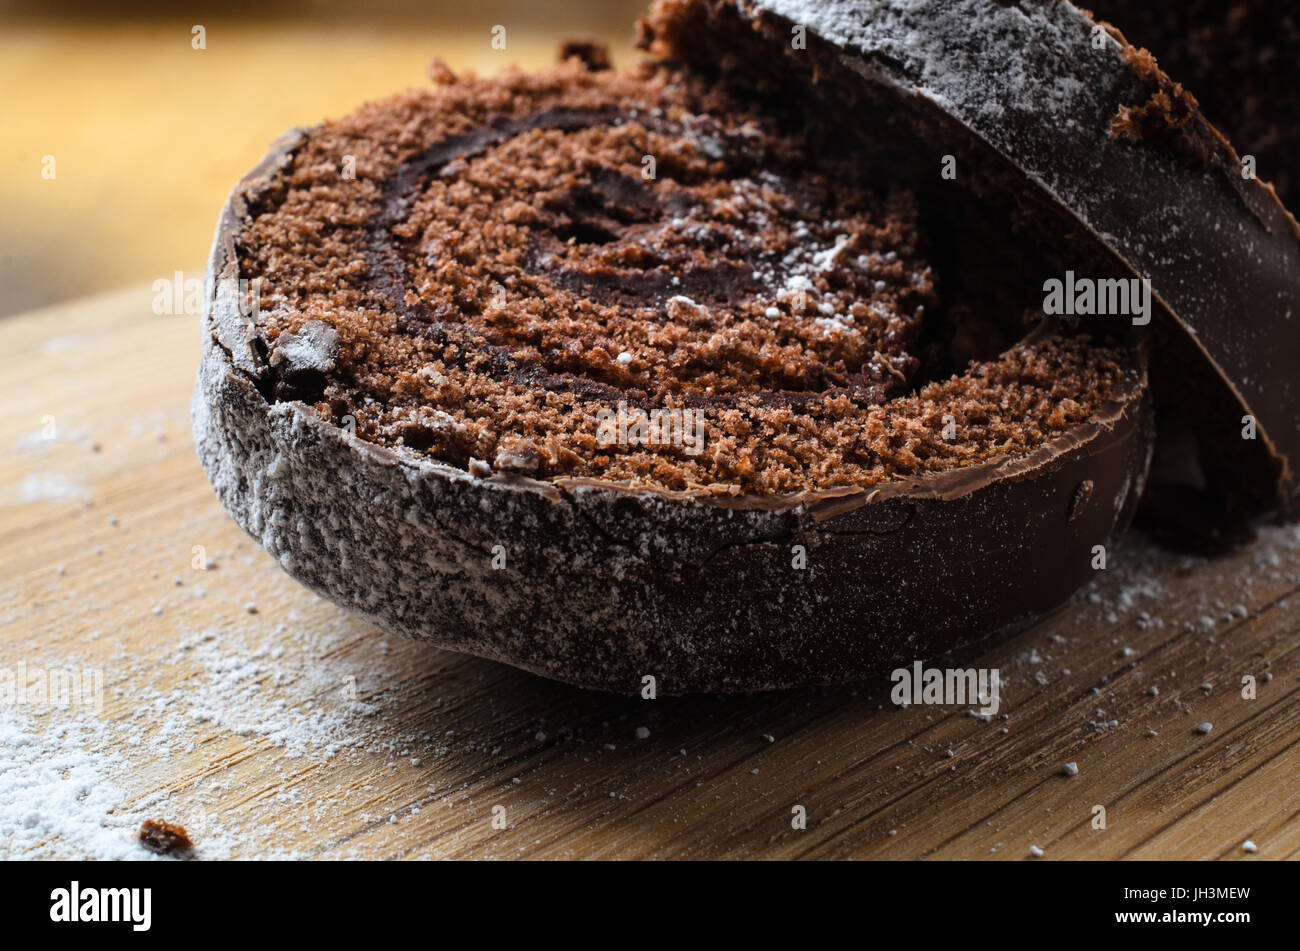 Close up of  sliced chocolate Christmas Yule log, or Swiss Roll cake.  Dusted with icing sugar which has spilled on to wooden chopping board. Stock Photo